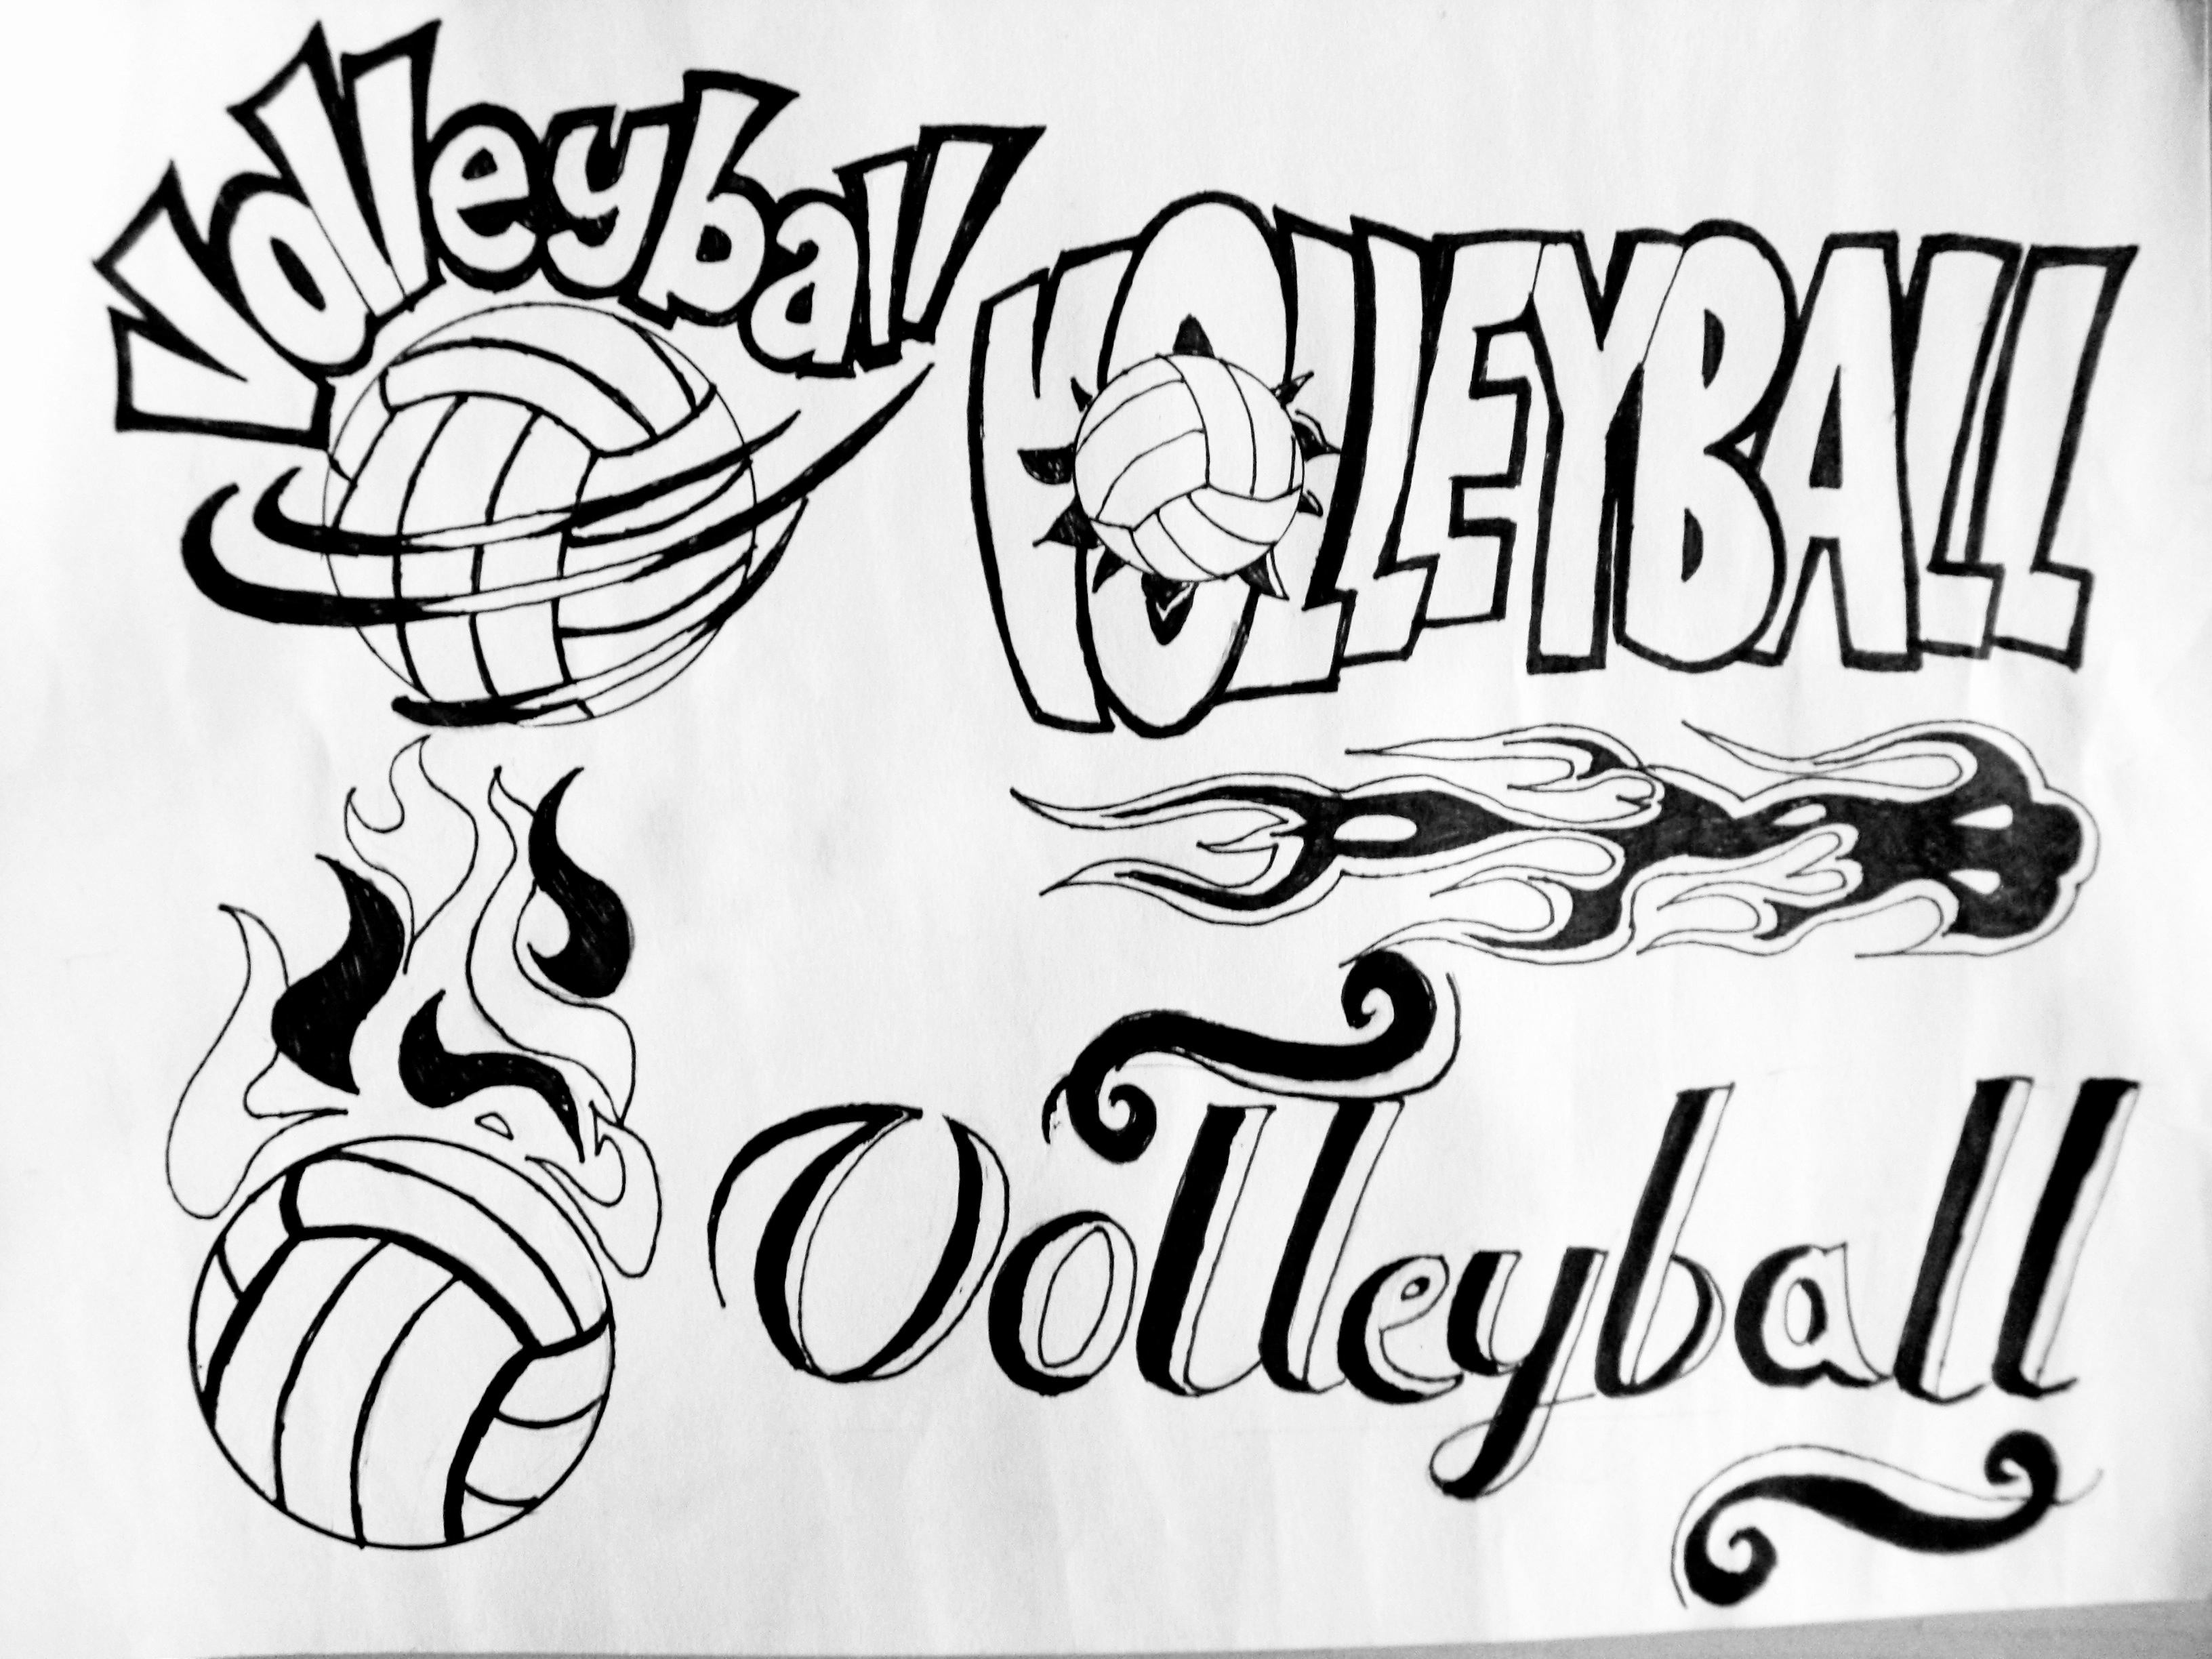 cool volleyball drawings